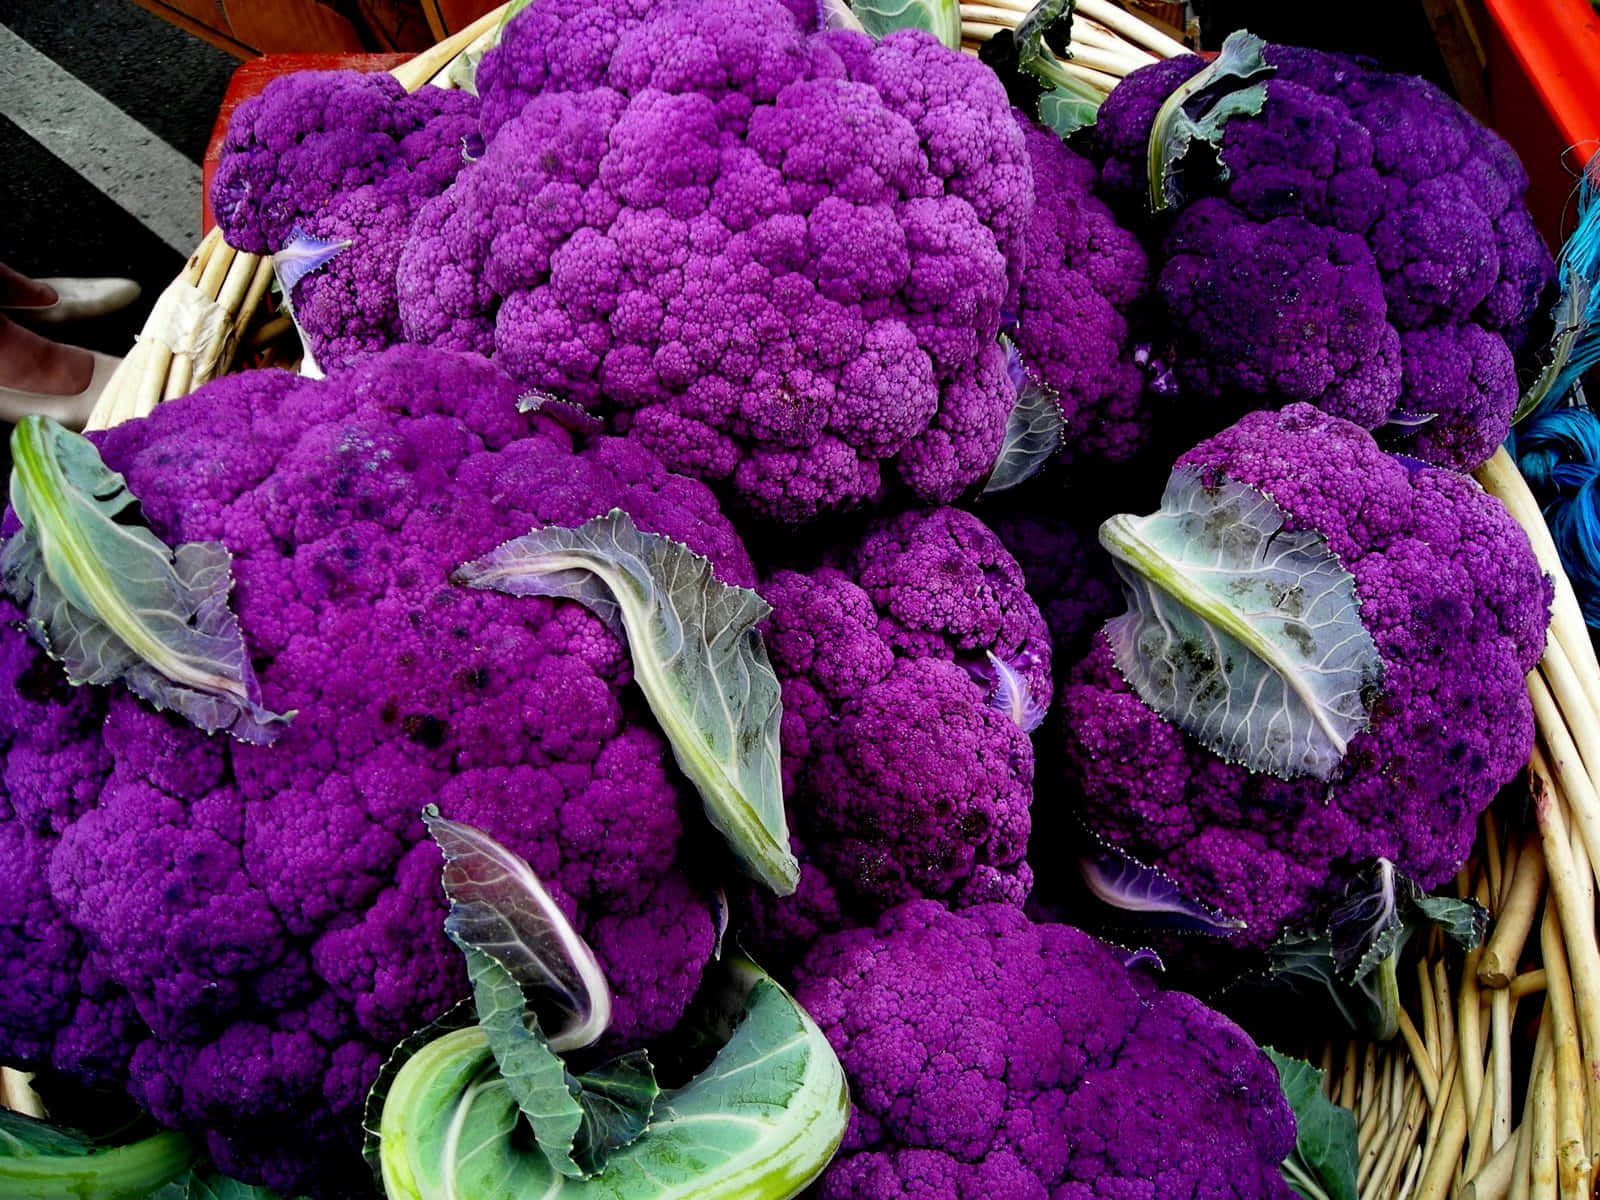 "The Perfect Shade of Purple: A Close-up of a Purple Cauliflower" Wallpaper